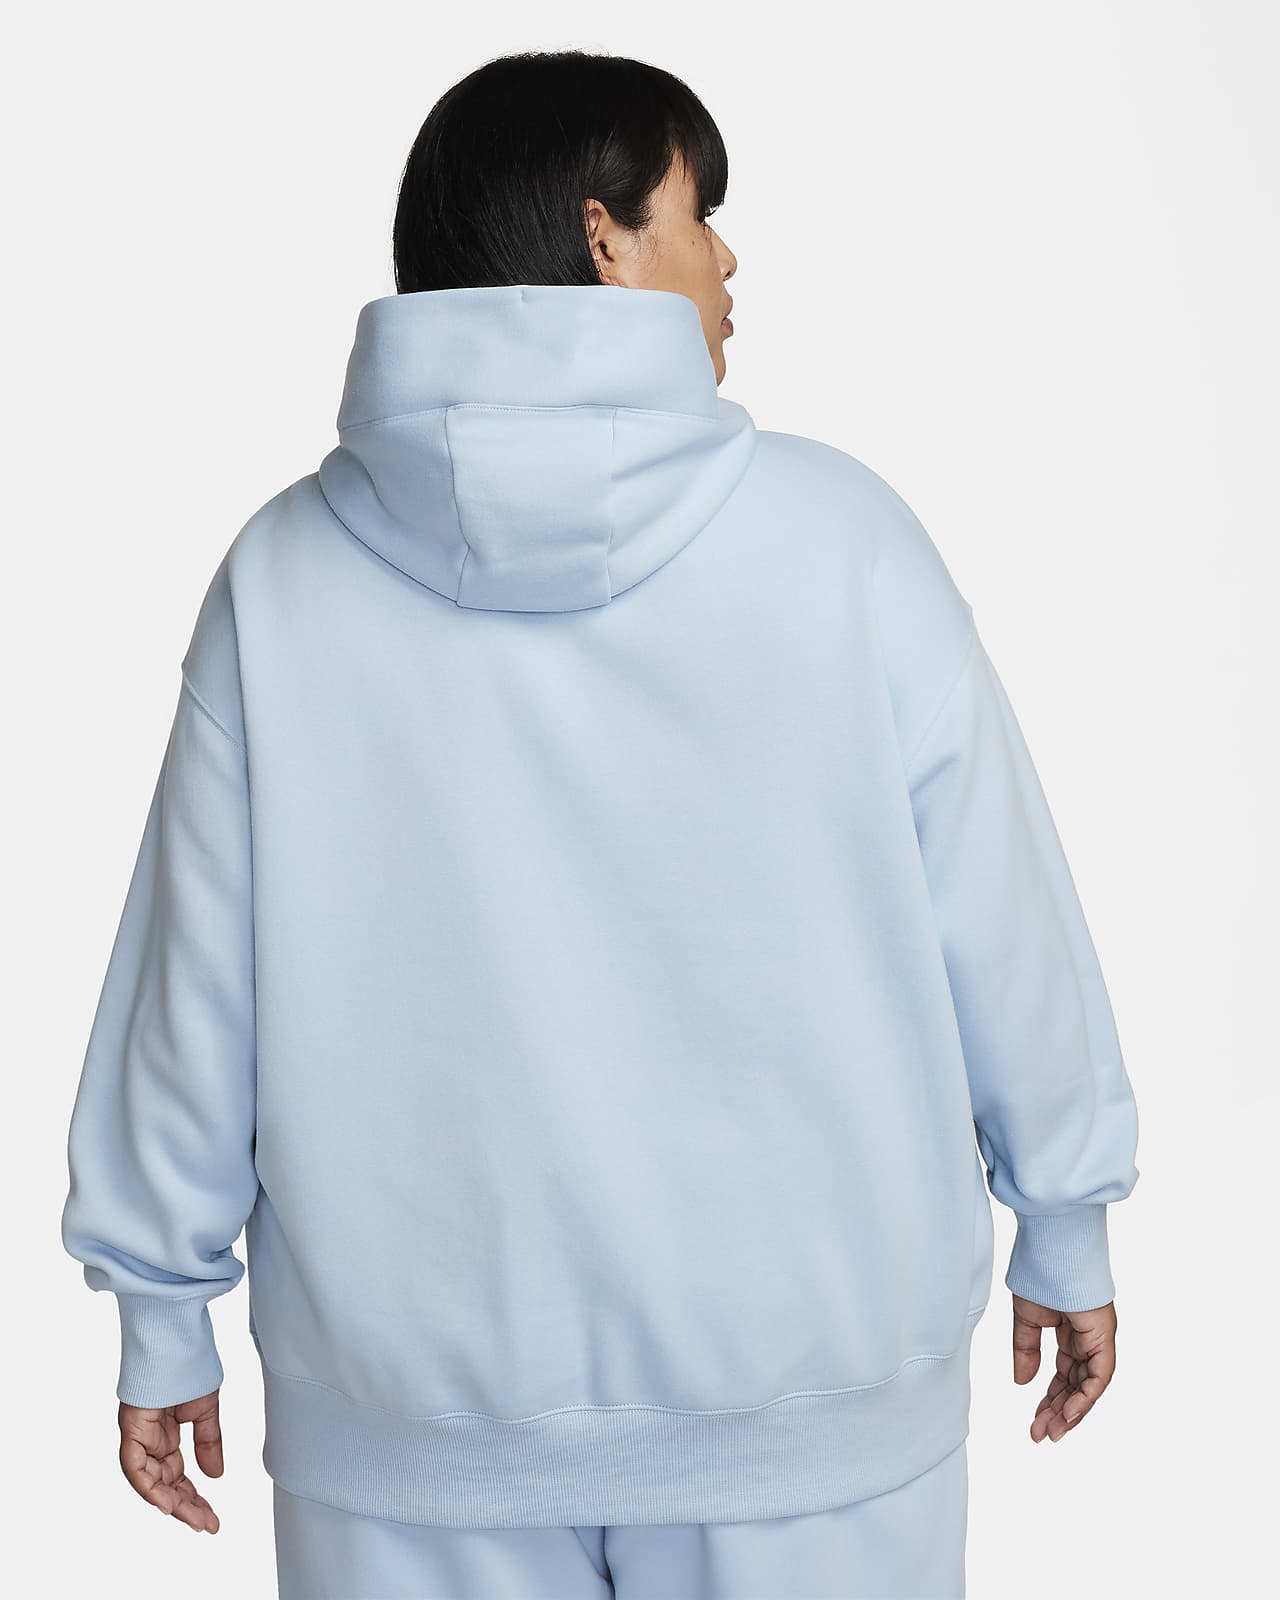 https://static.nike.com/a/images/t_PDP_1280_v1/f_auto,q_auto:eco/1b42fb03-d6c8-44b8-a735-3a3257754678/sportswear-phoenix-fleece-womens-oversized-pullover-hoodie-plus-size-mJ8HdD.png